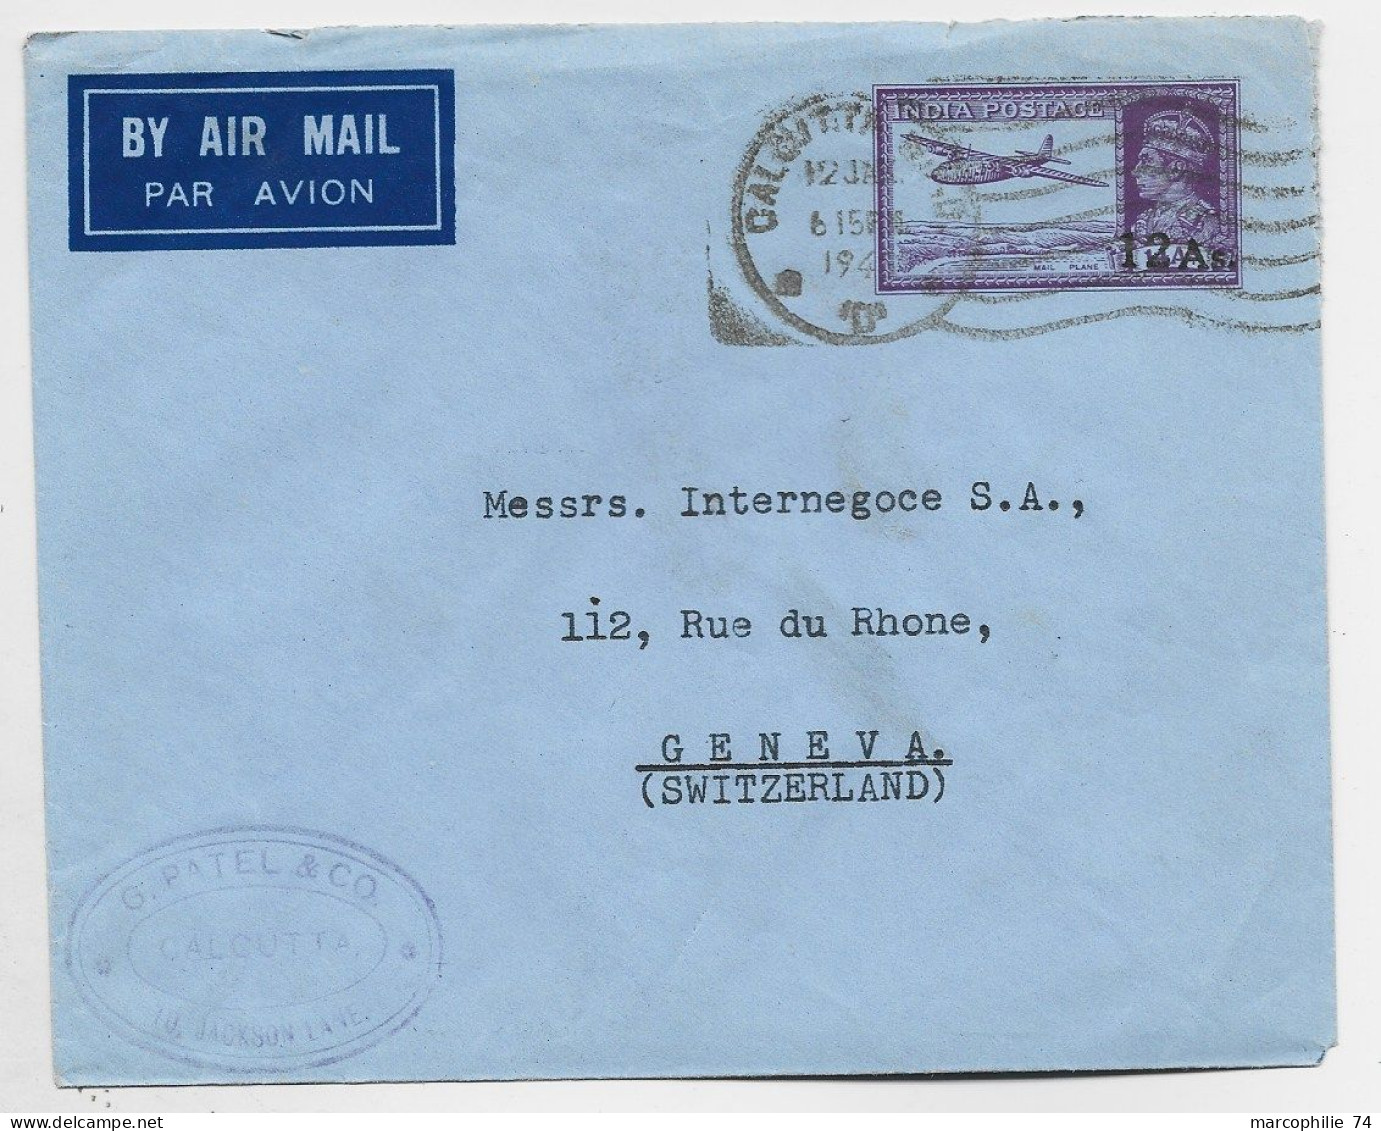 INDIA POSTAGE 12AS ENTIER ENVELOPPE COVER AIR MAIL CALCUTTA 1947 TO SUISSE - 1936-47  George VI